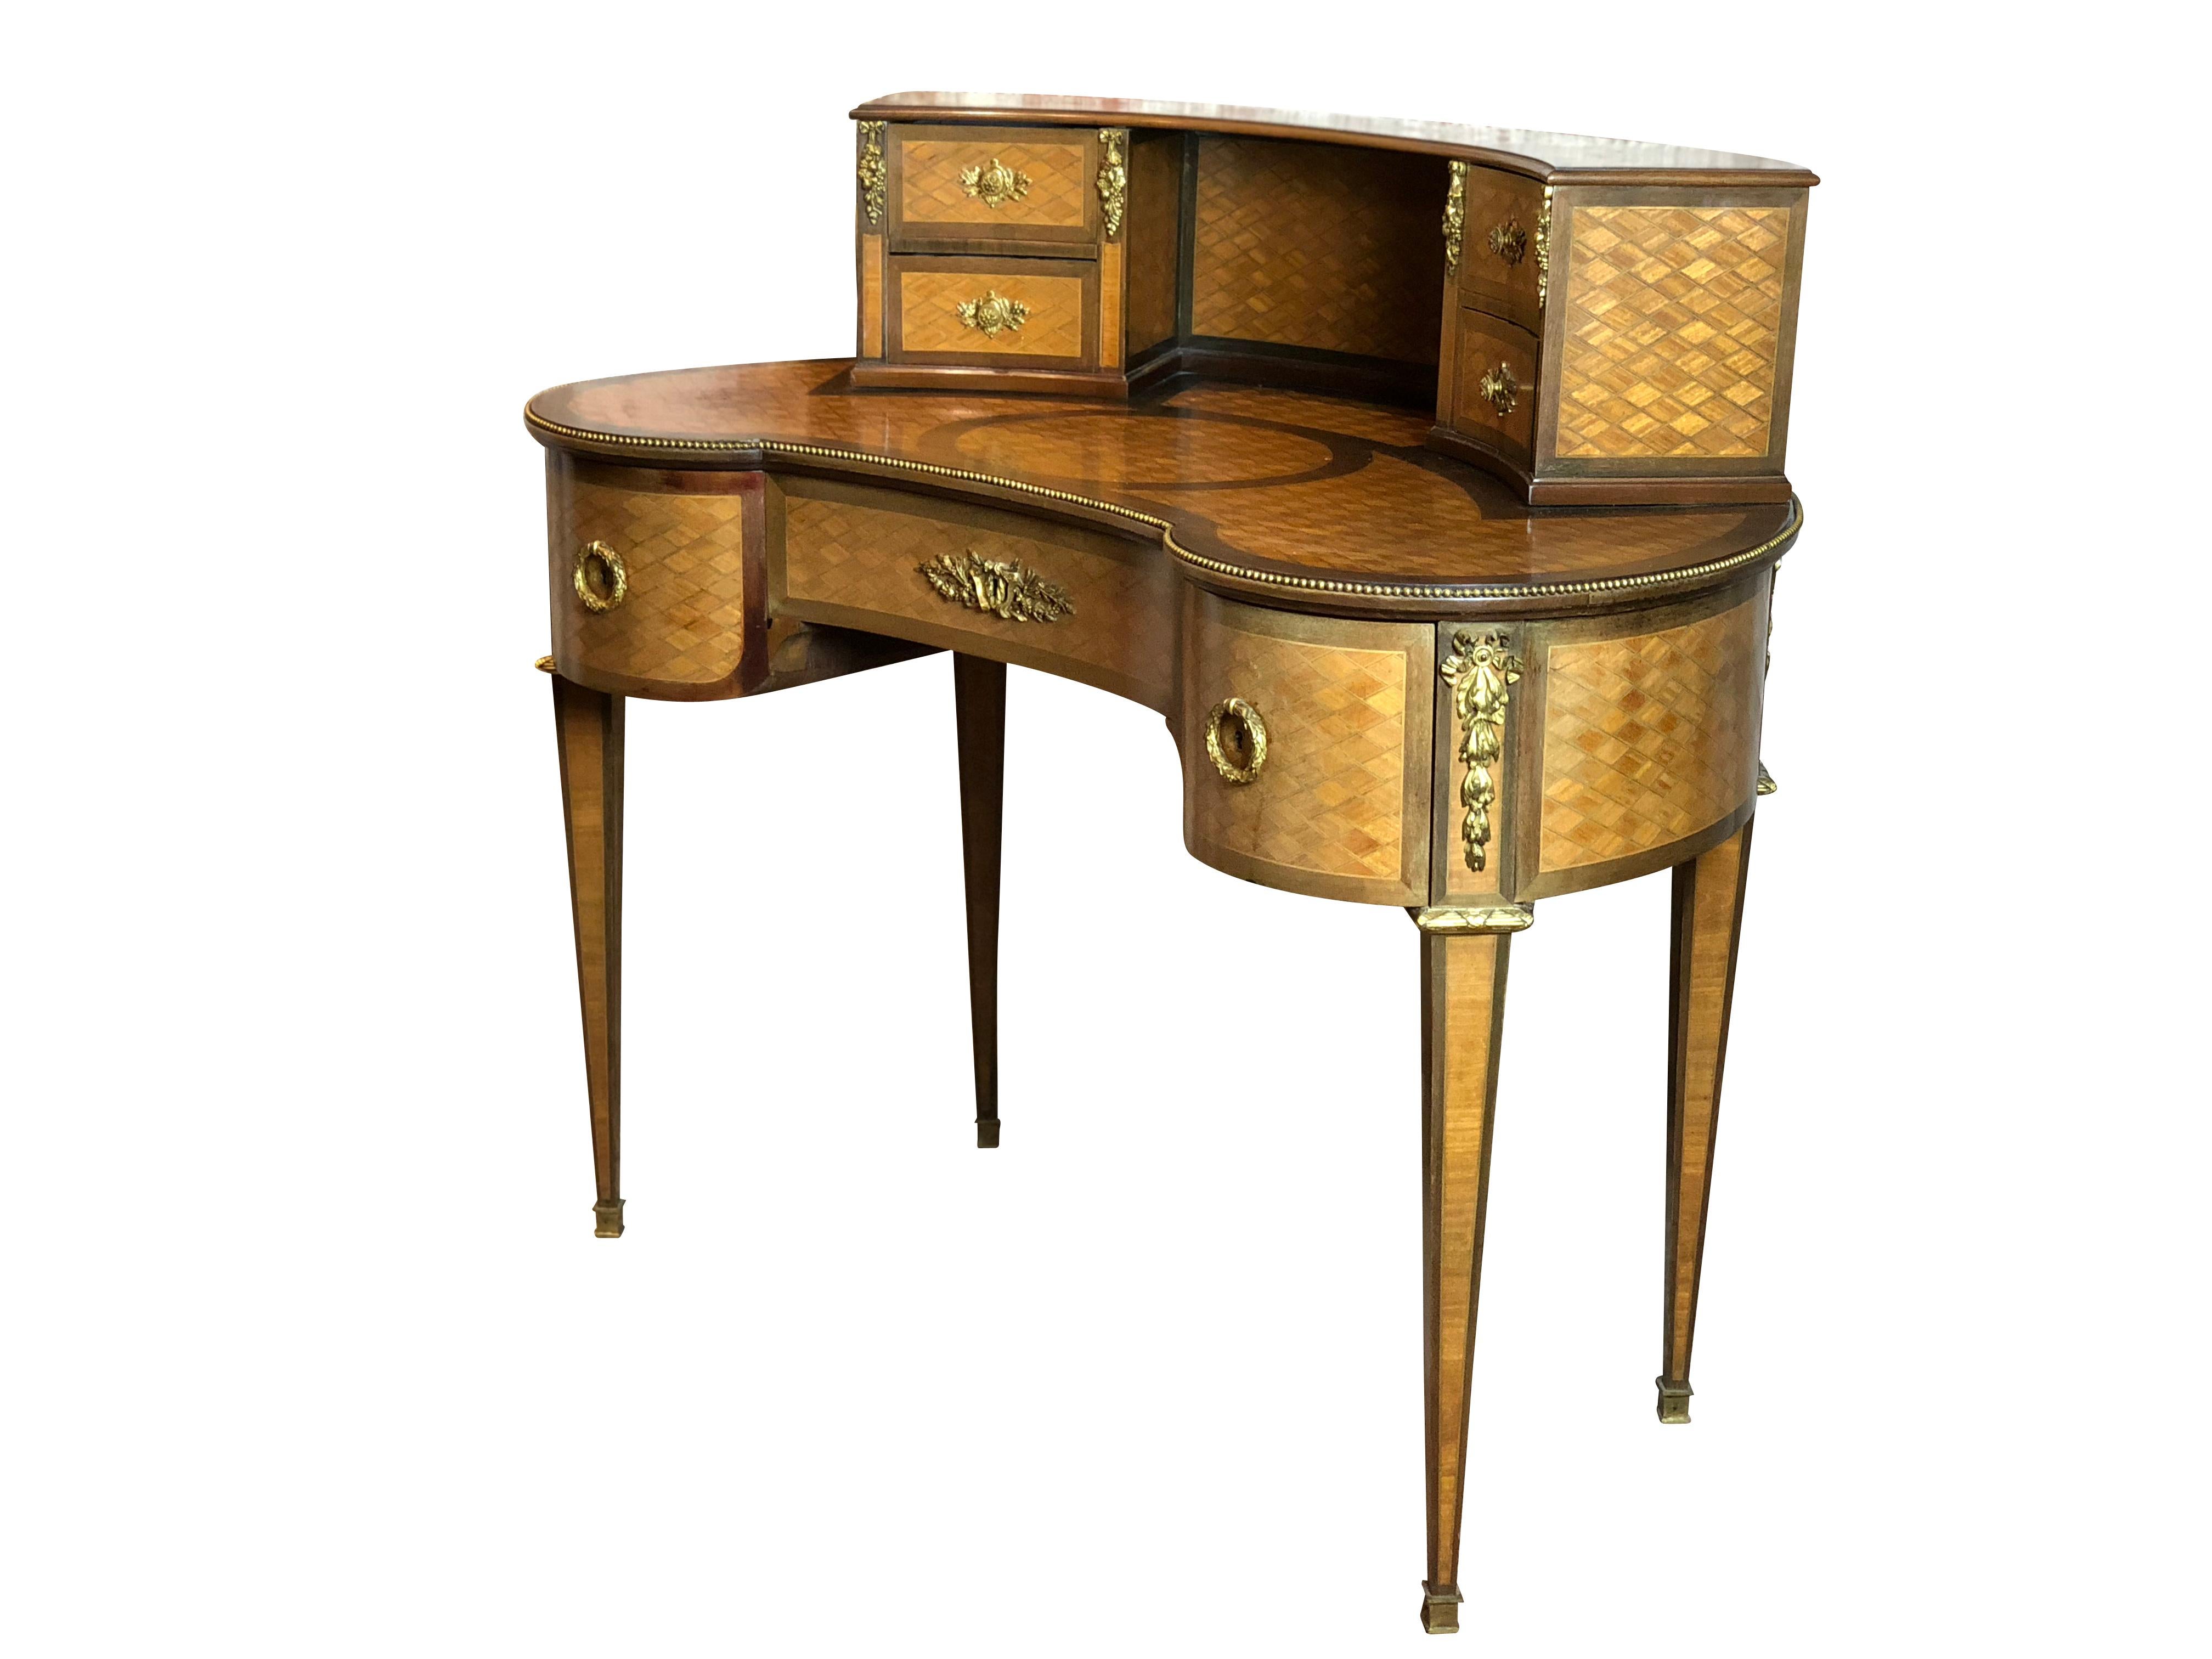 A charming 19th century French Louis XVI style gilt bronze-mounted kidney shaped and parquetry inlaid desk

France, circa 1890

Having Seven-drawers with the original key, over Louis XVI style shaped legs with gilt bronze mounts. The top